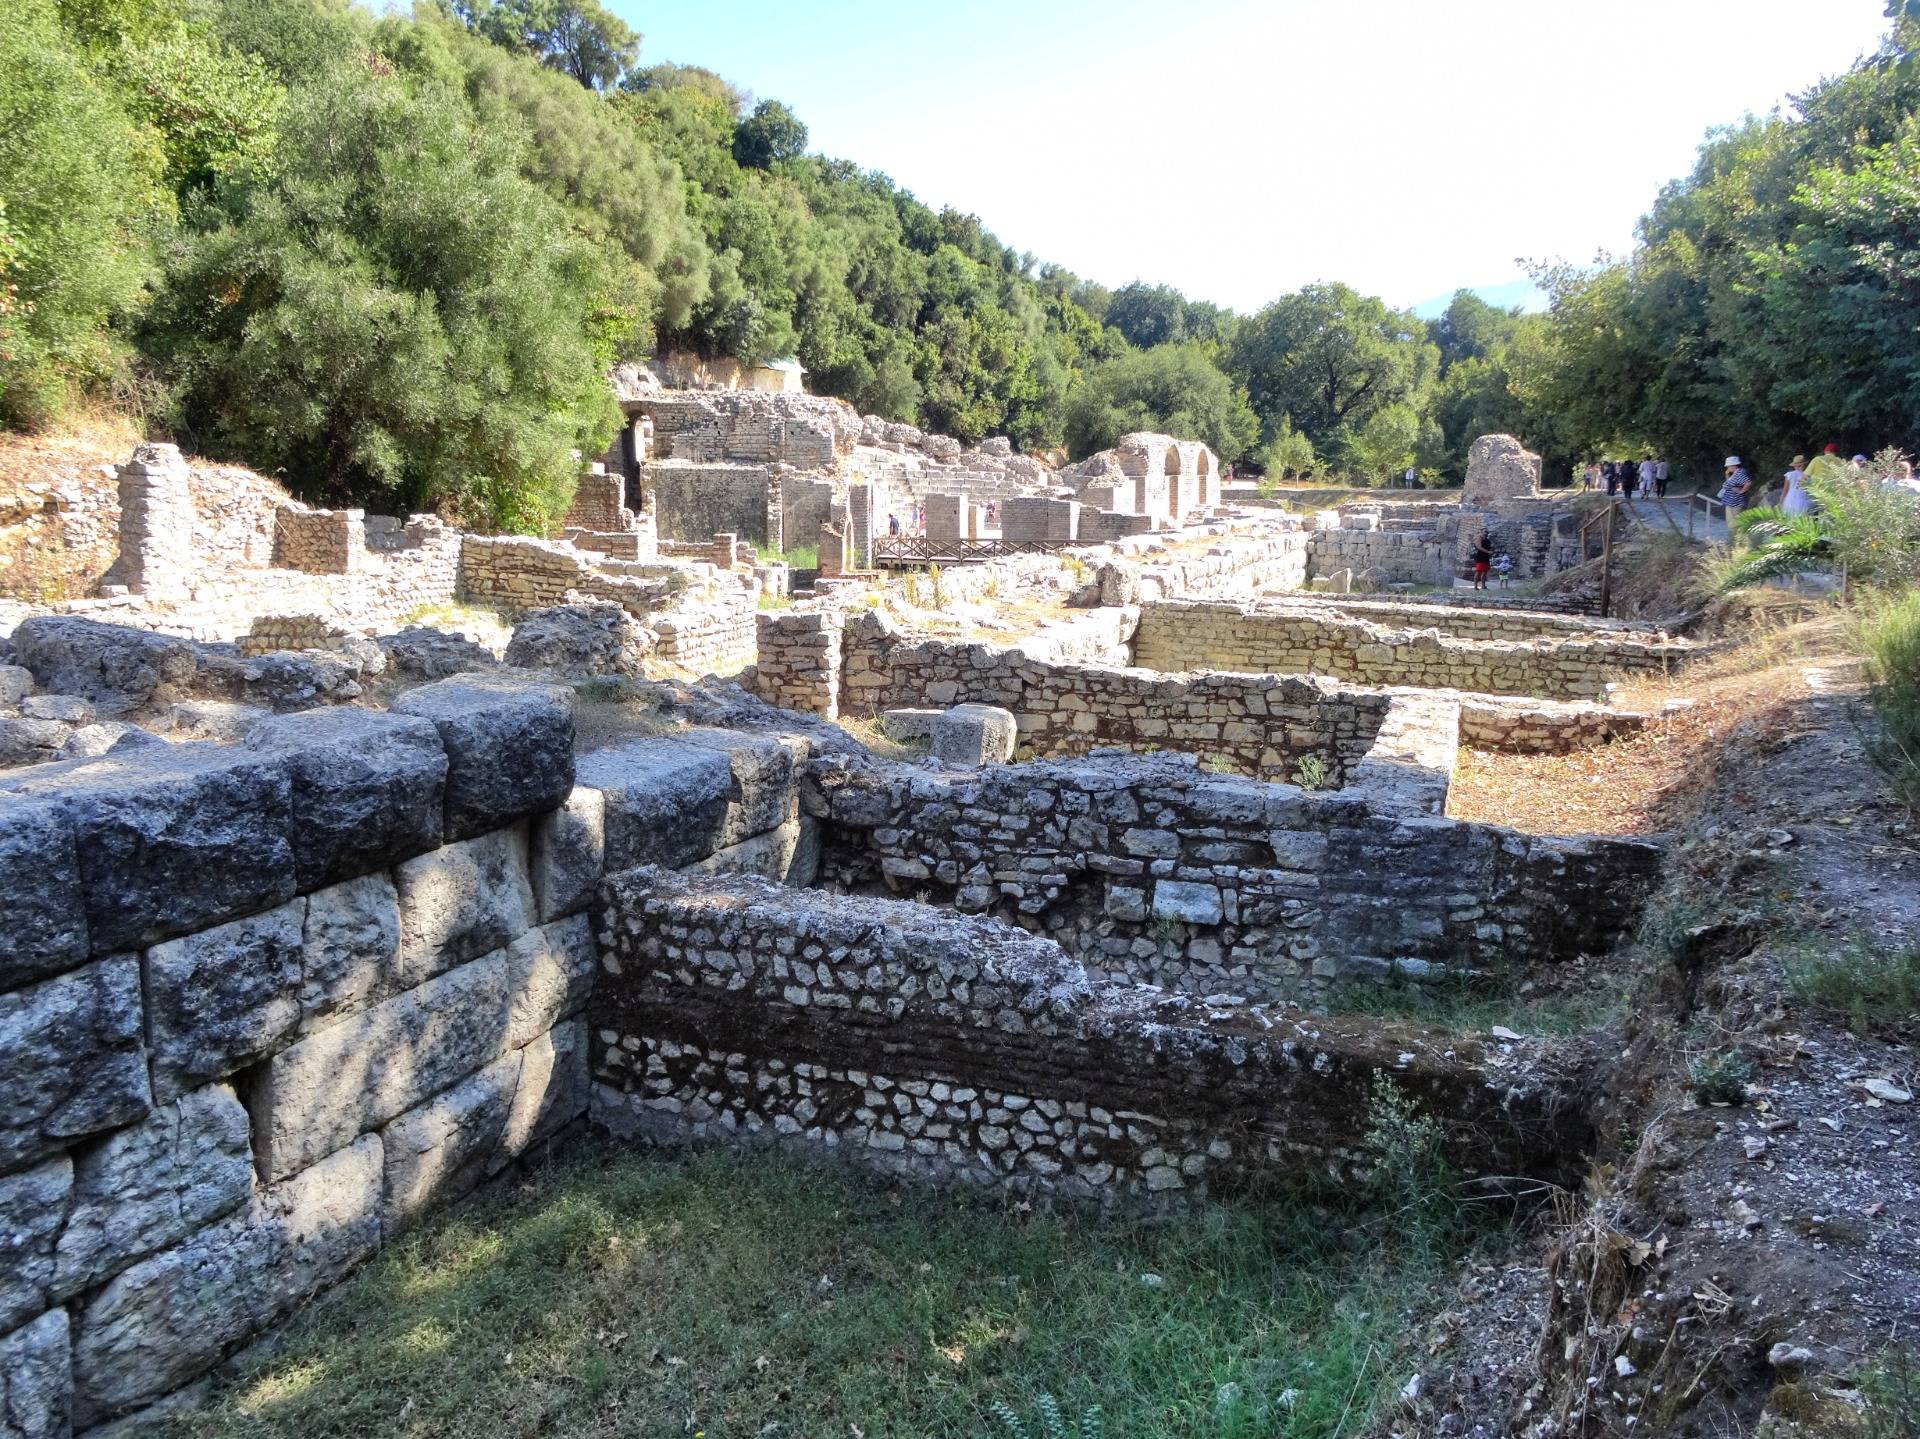 The foundations of ancient settlements